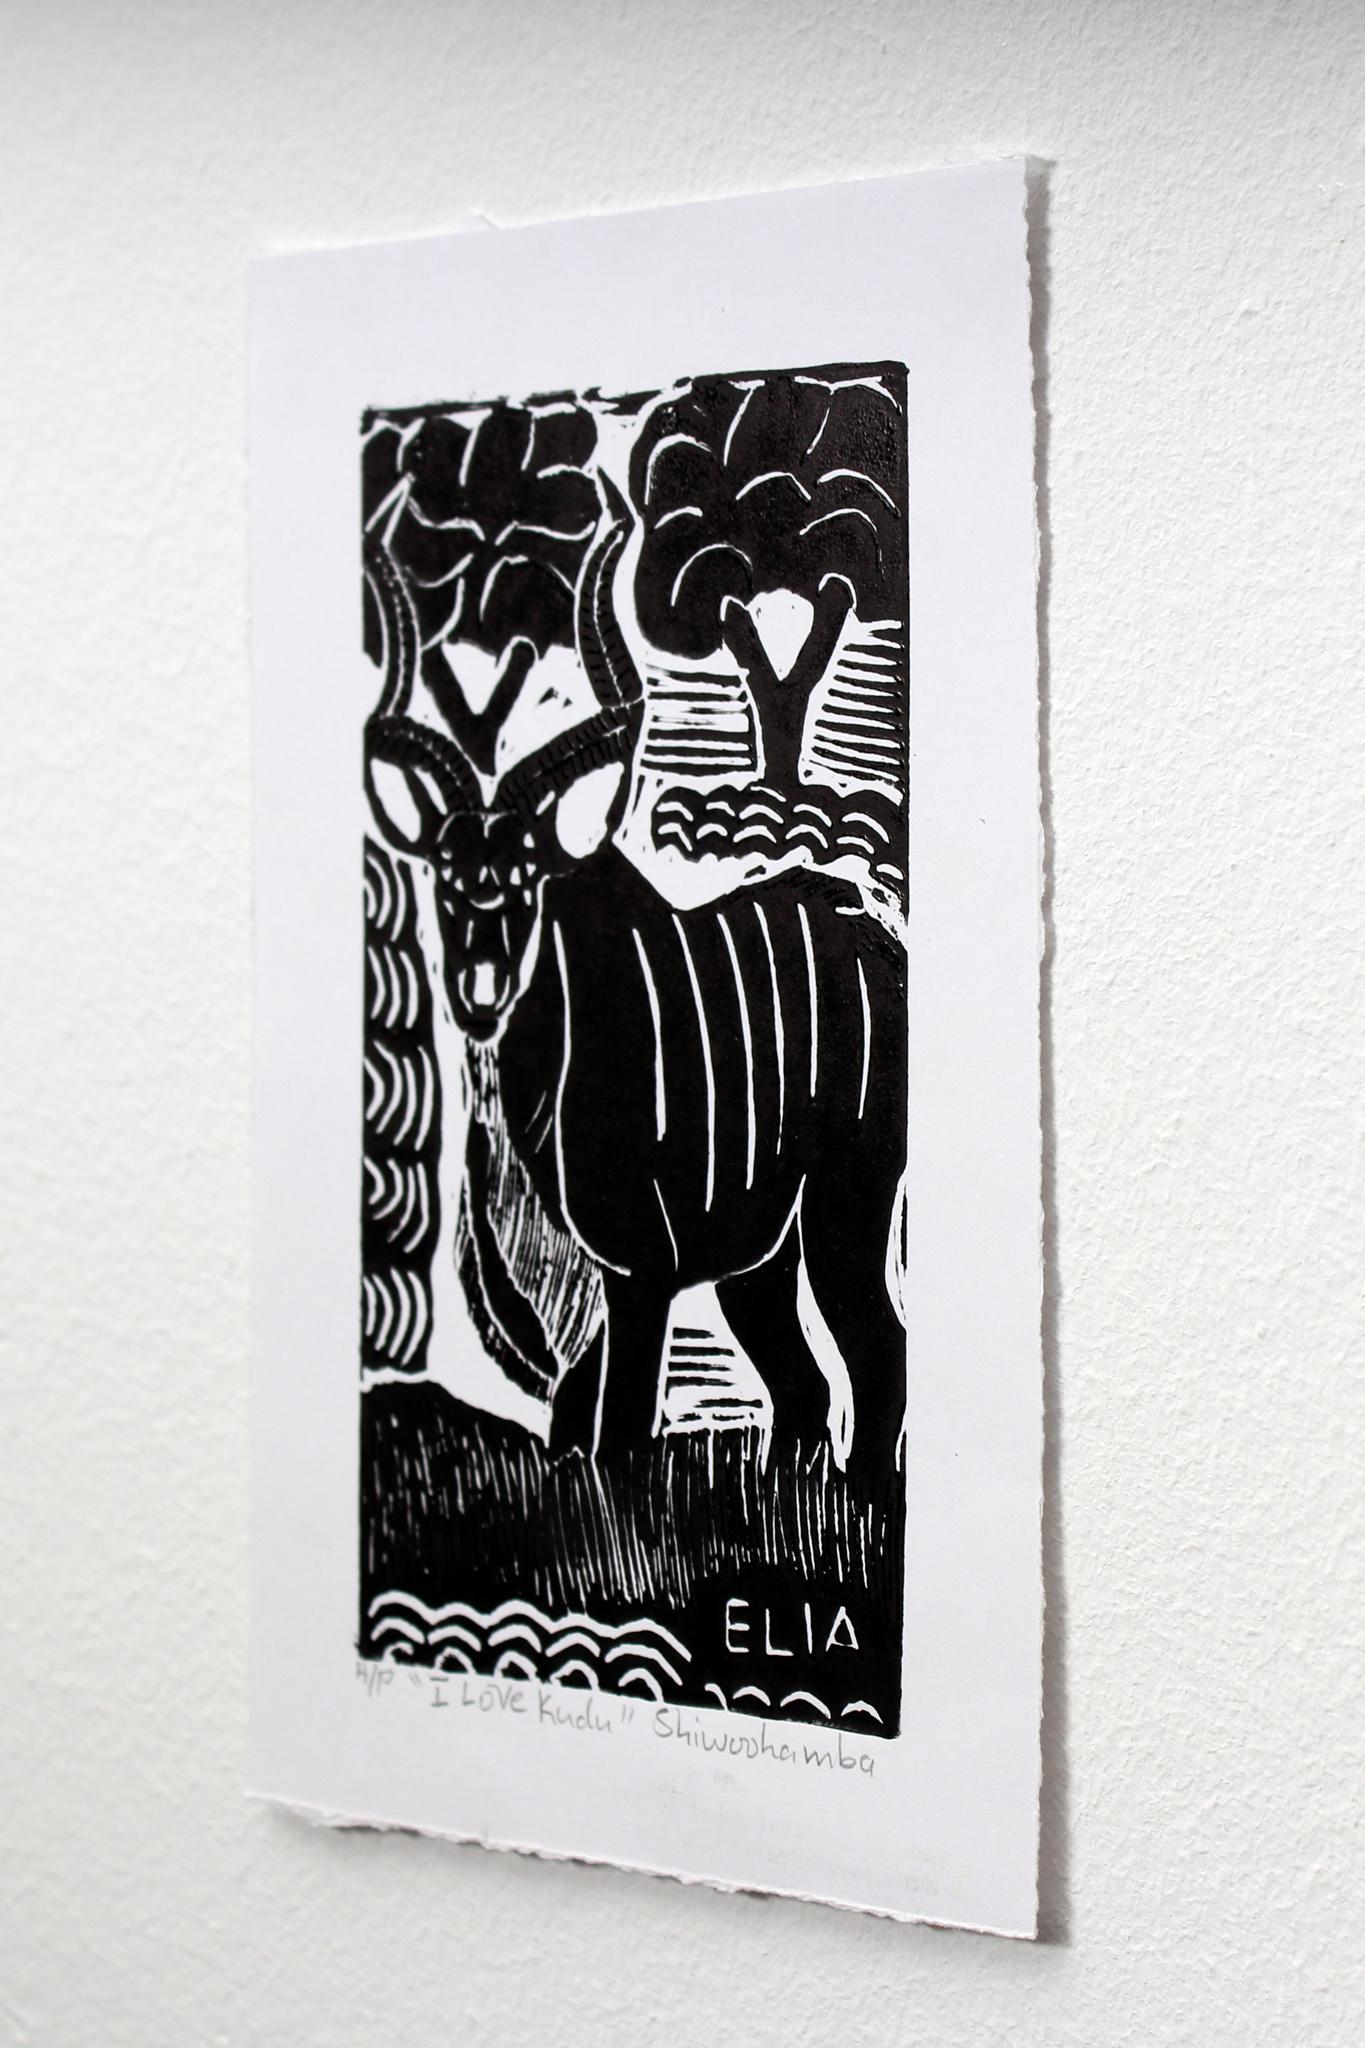 I love kudu, Linoleum block prints on paper.

Elia Shiwoohamba was born in 1981 in Windhoek, Namibia. He graduated from the John Muafangejo Art Centre in Windhoek in 2006. Specialising in printmaking and sculpture, Shiwoohamba works as a